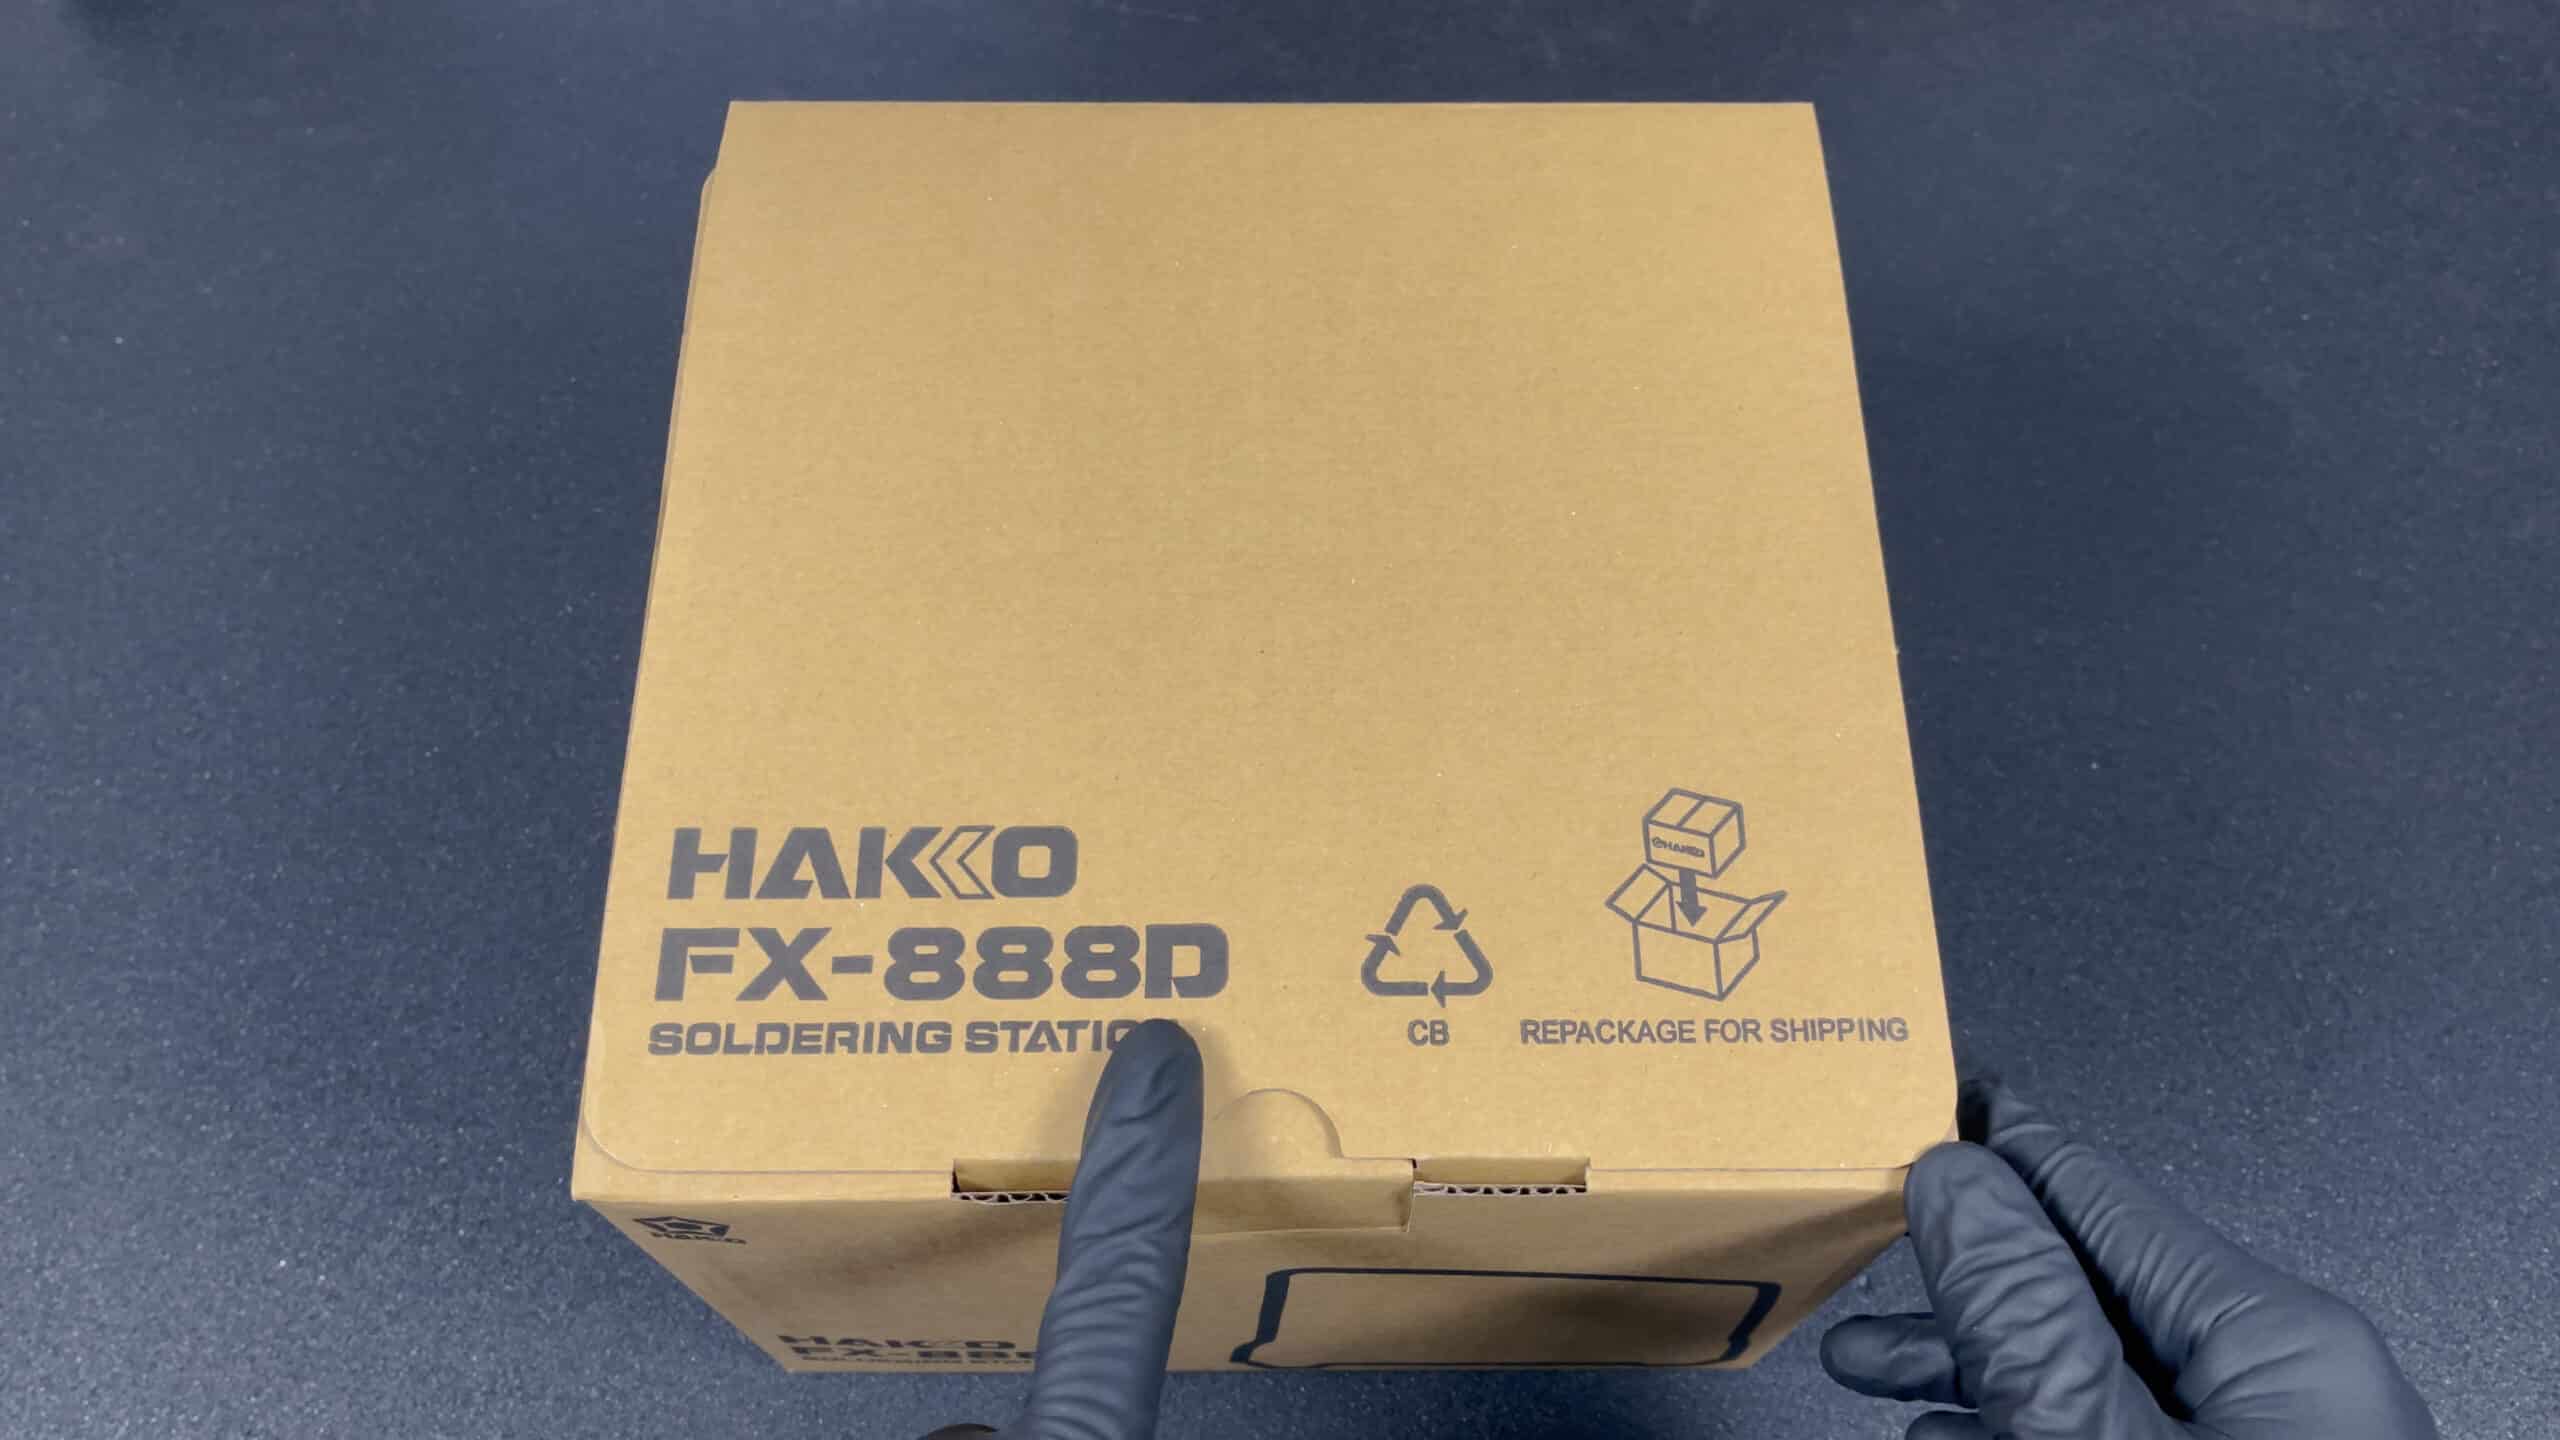 The packaging of the soldering station